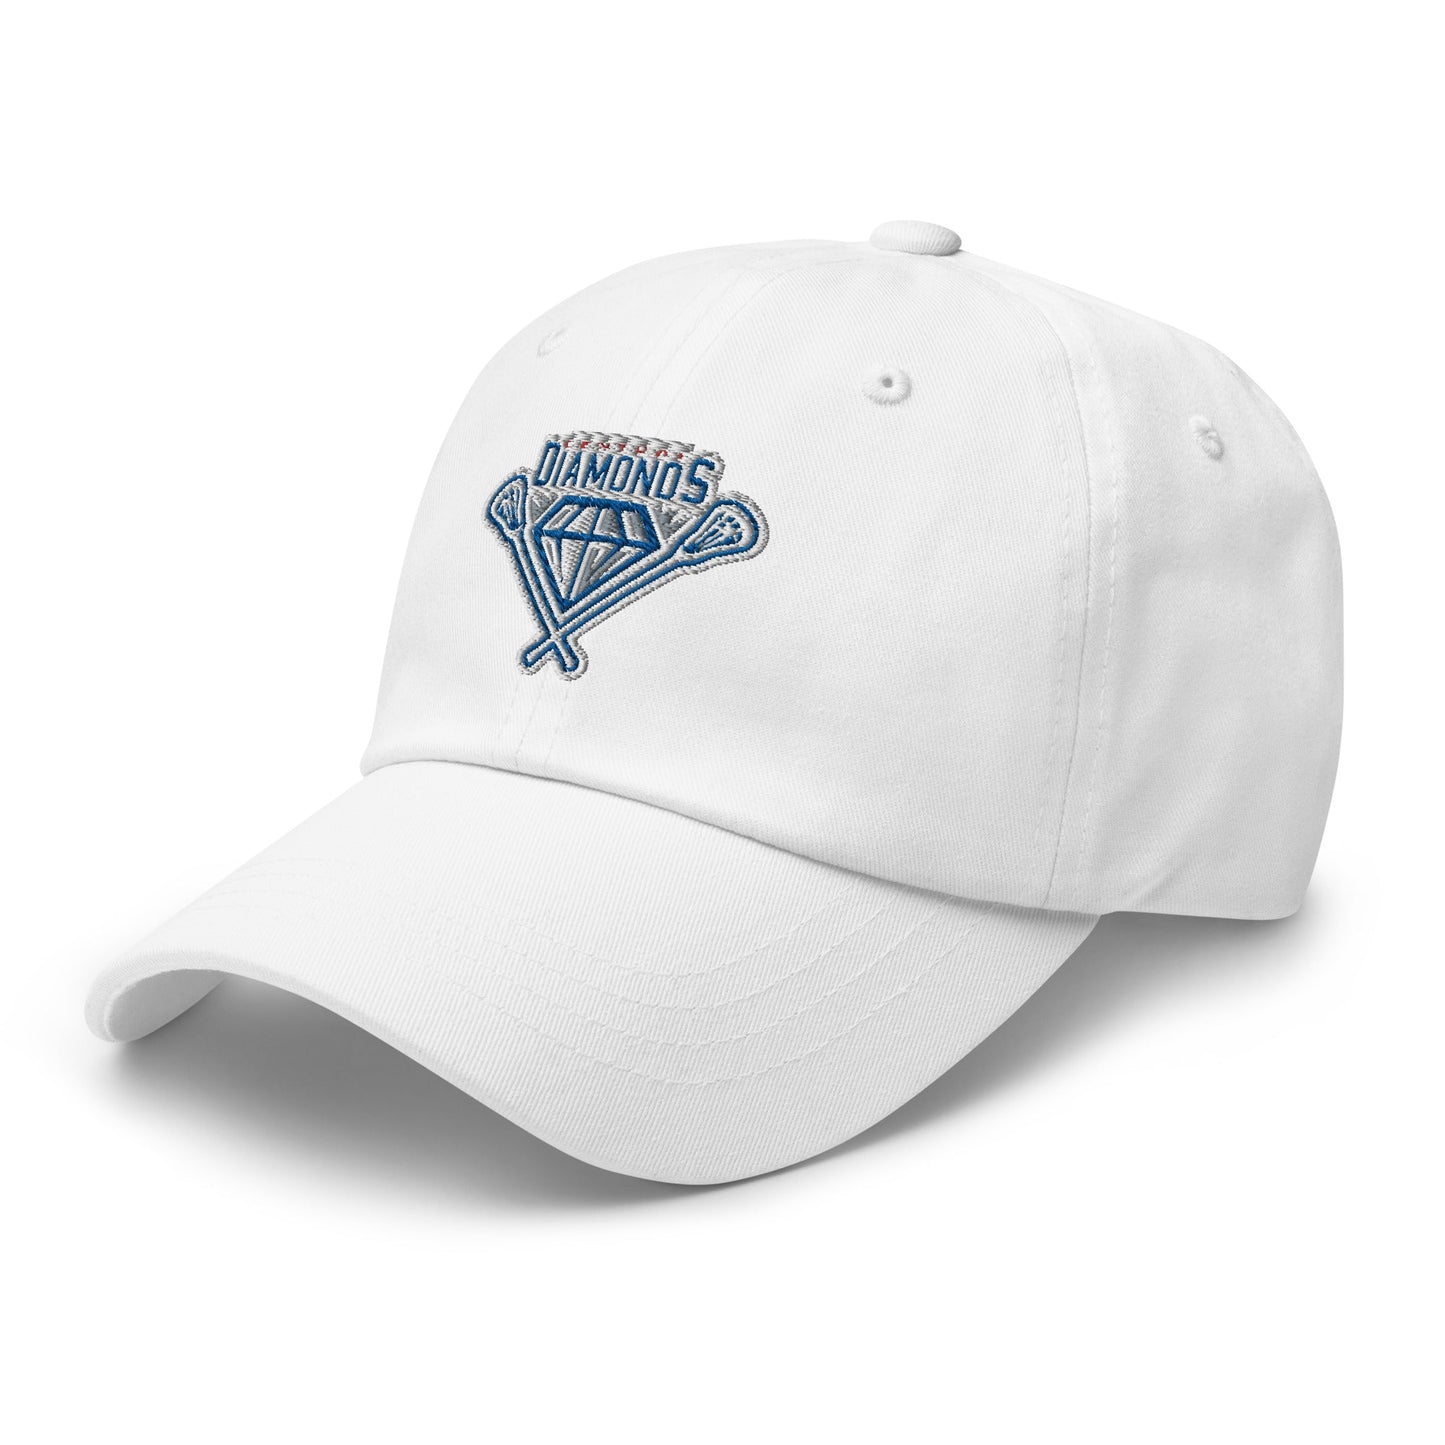 Central Diamonds Embroidered Dad Hat Signature Lacrosse